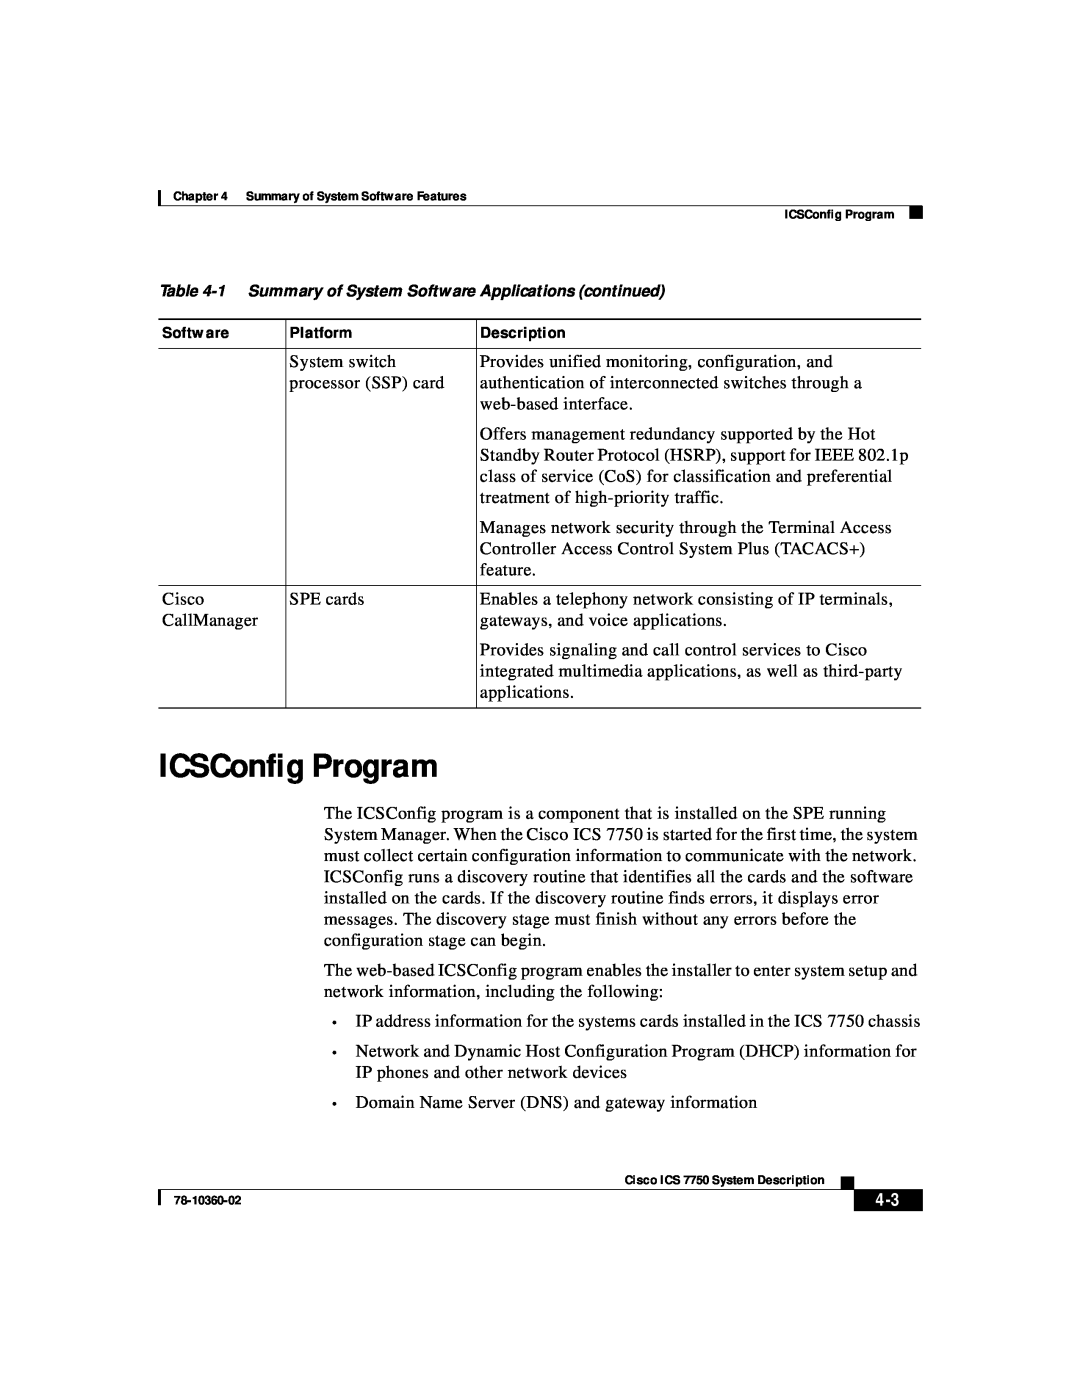 Cisco Systems ICS-7750 manual ICSConfig Program, 1 Summary of System Software Applications continued 